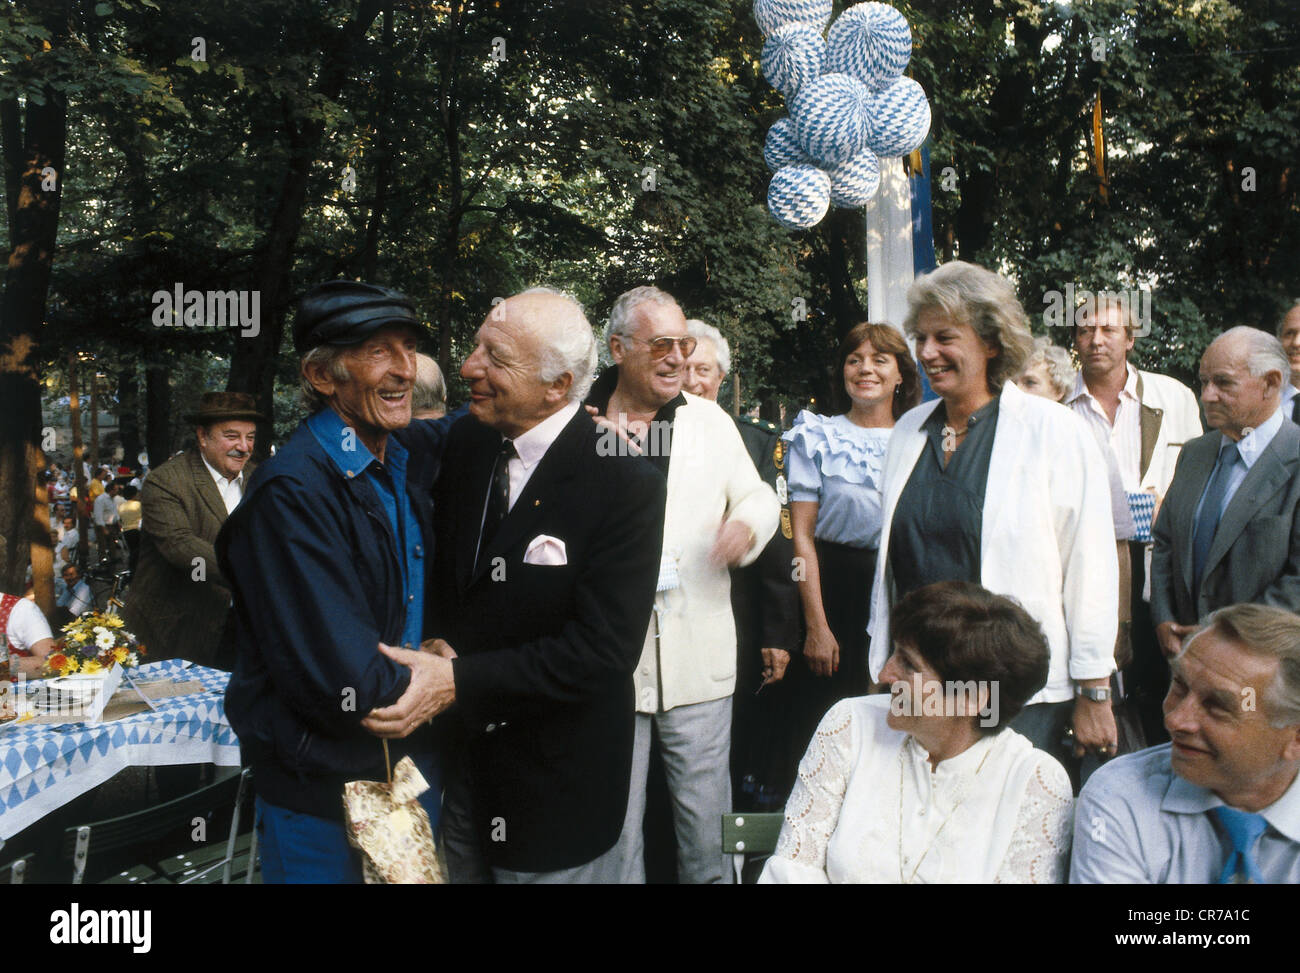 Scheel Walter 8.7.1919 - 24.8.2016, German politician (FDP), group picture, with his wife Mildred, film producer Helmut Ringelmann and author Siegfried 'Sigi' Sommer in a beer garden, brithday party of Siegfried 'Sigi' Sommer, Munich, August 1984, Stock Photo